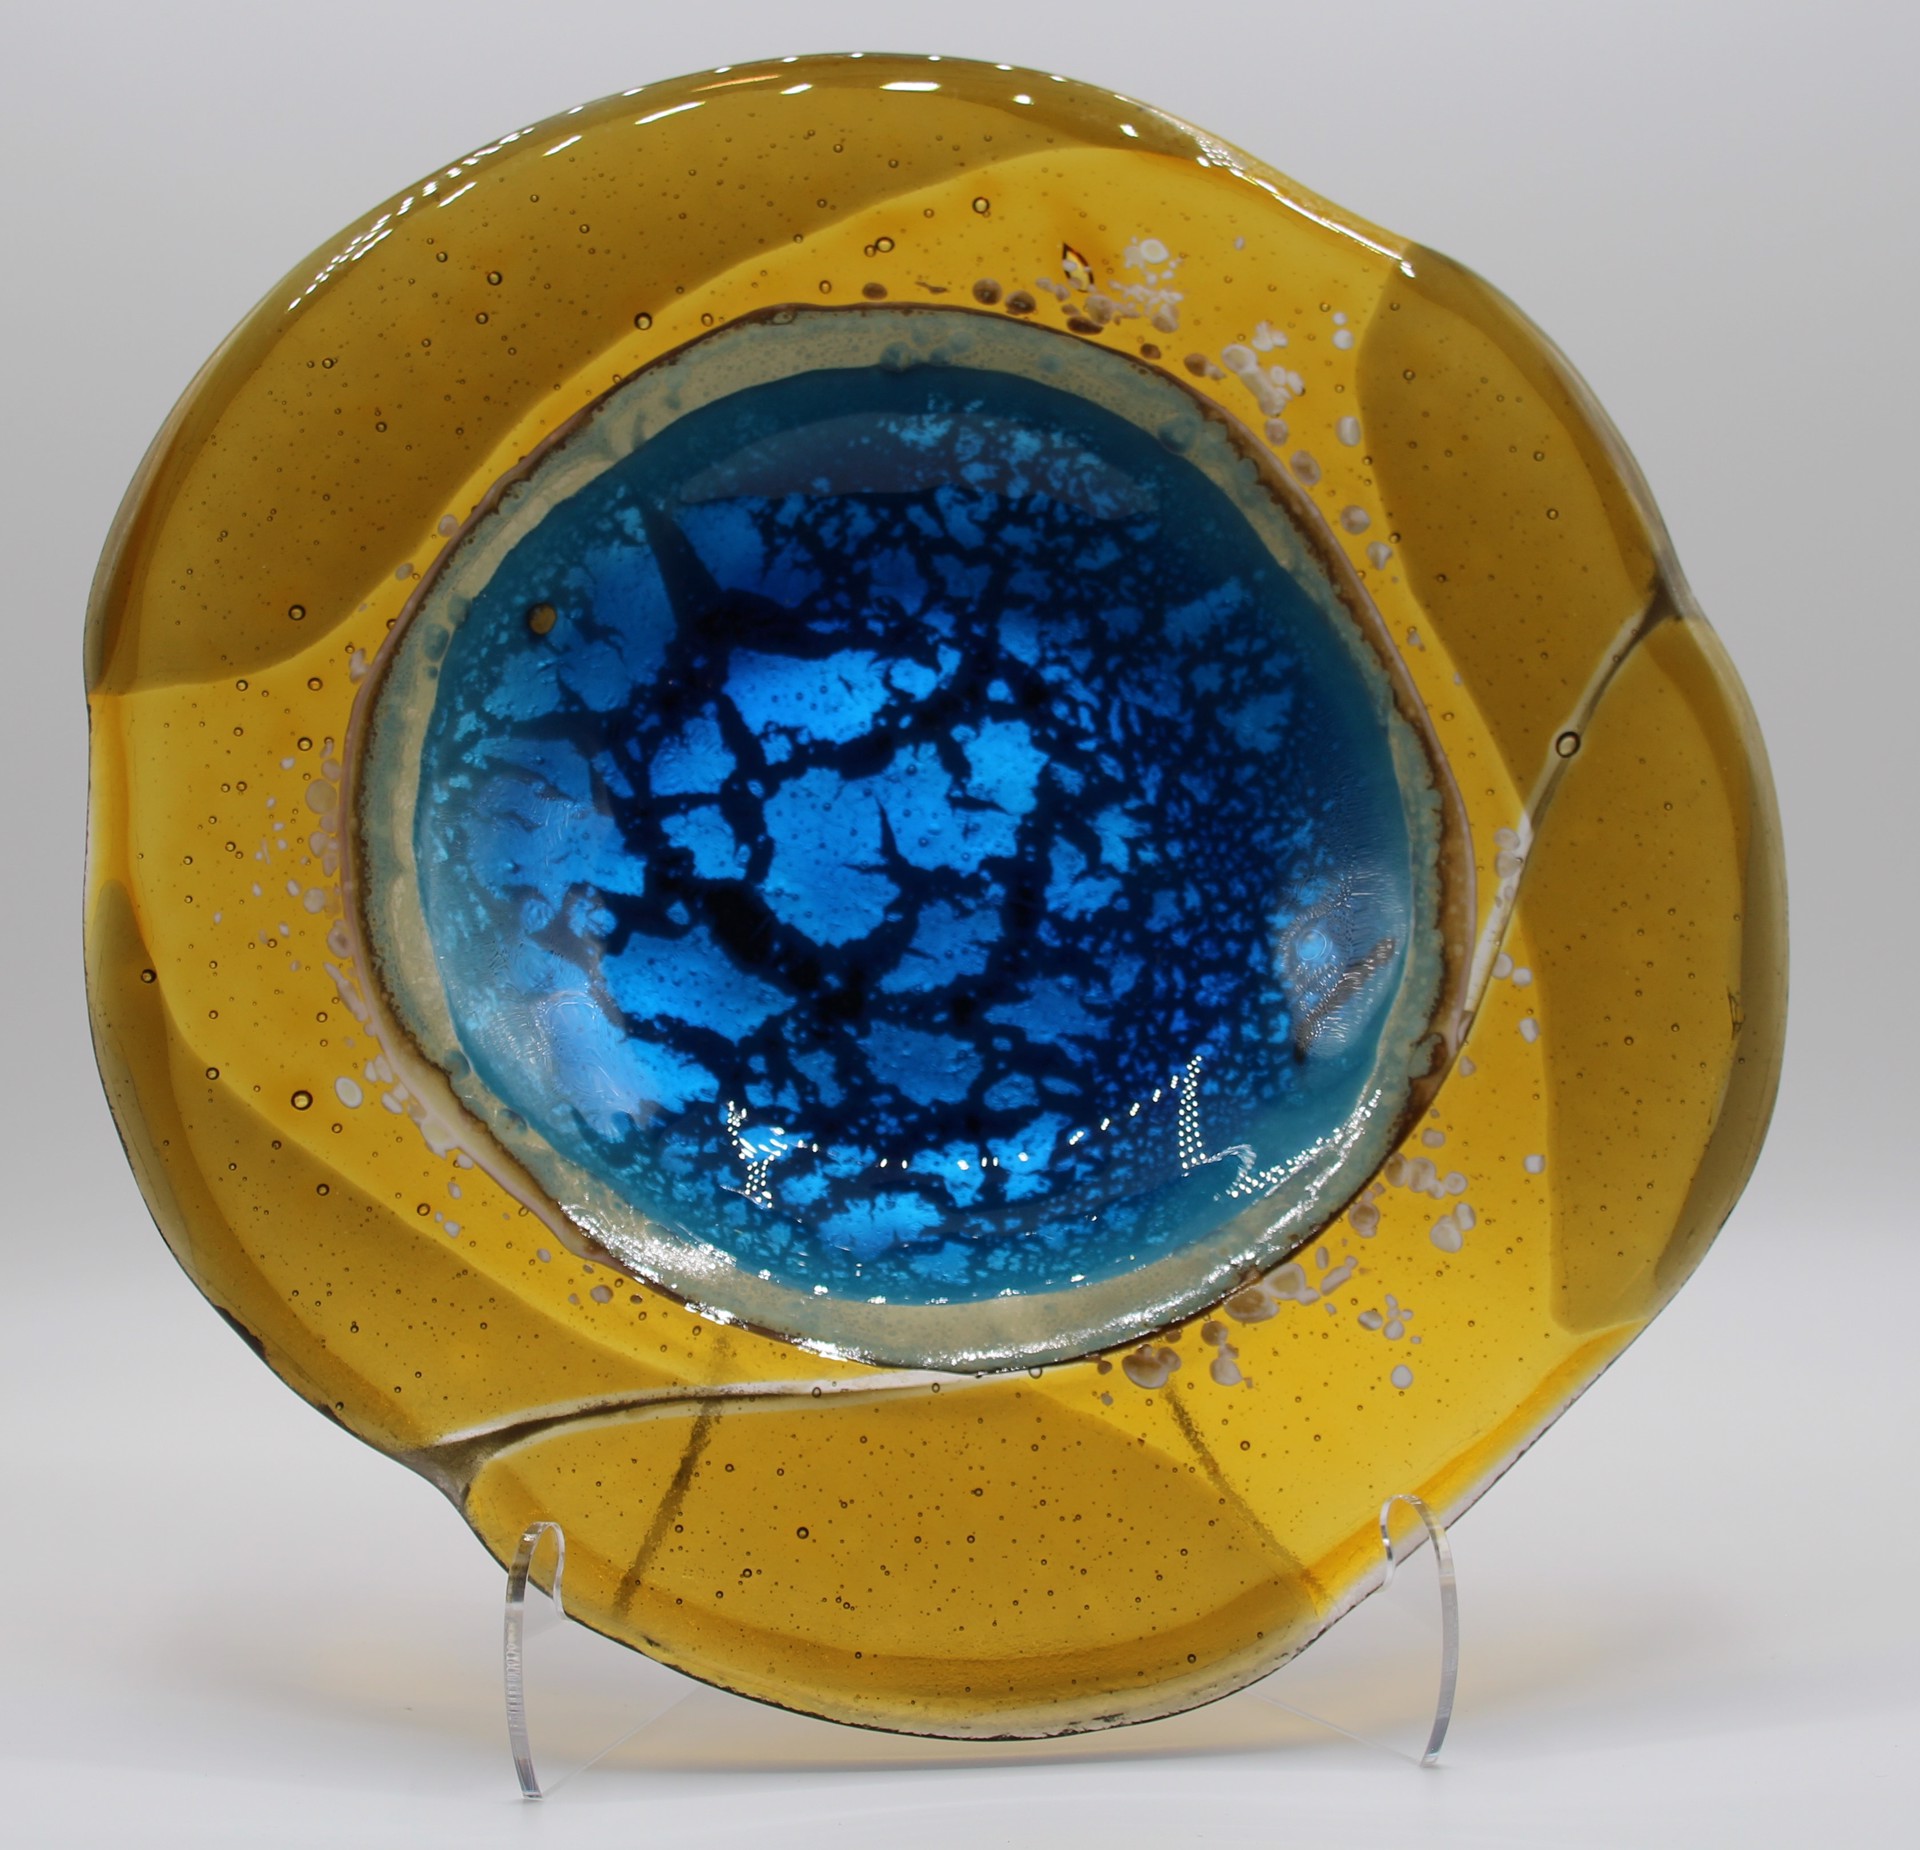 Thermal Puddle - Light 10" Bowl by Kathy Burk